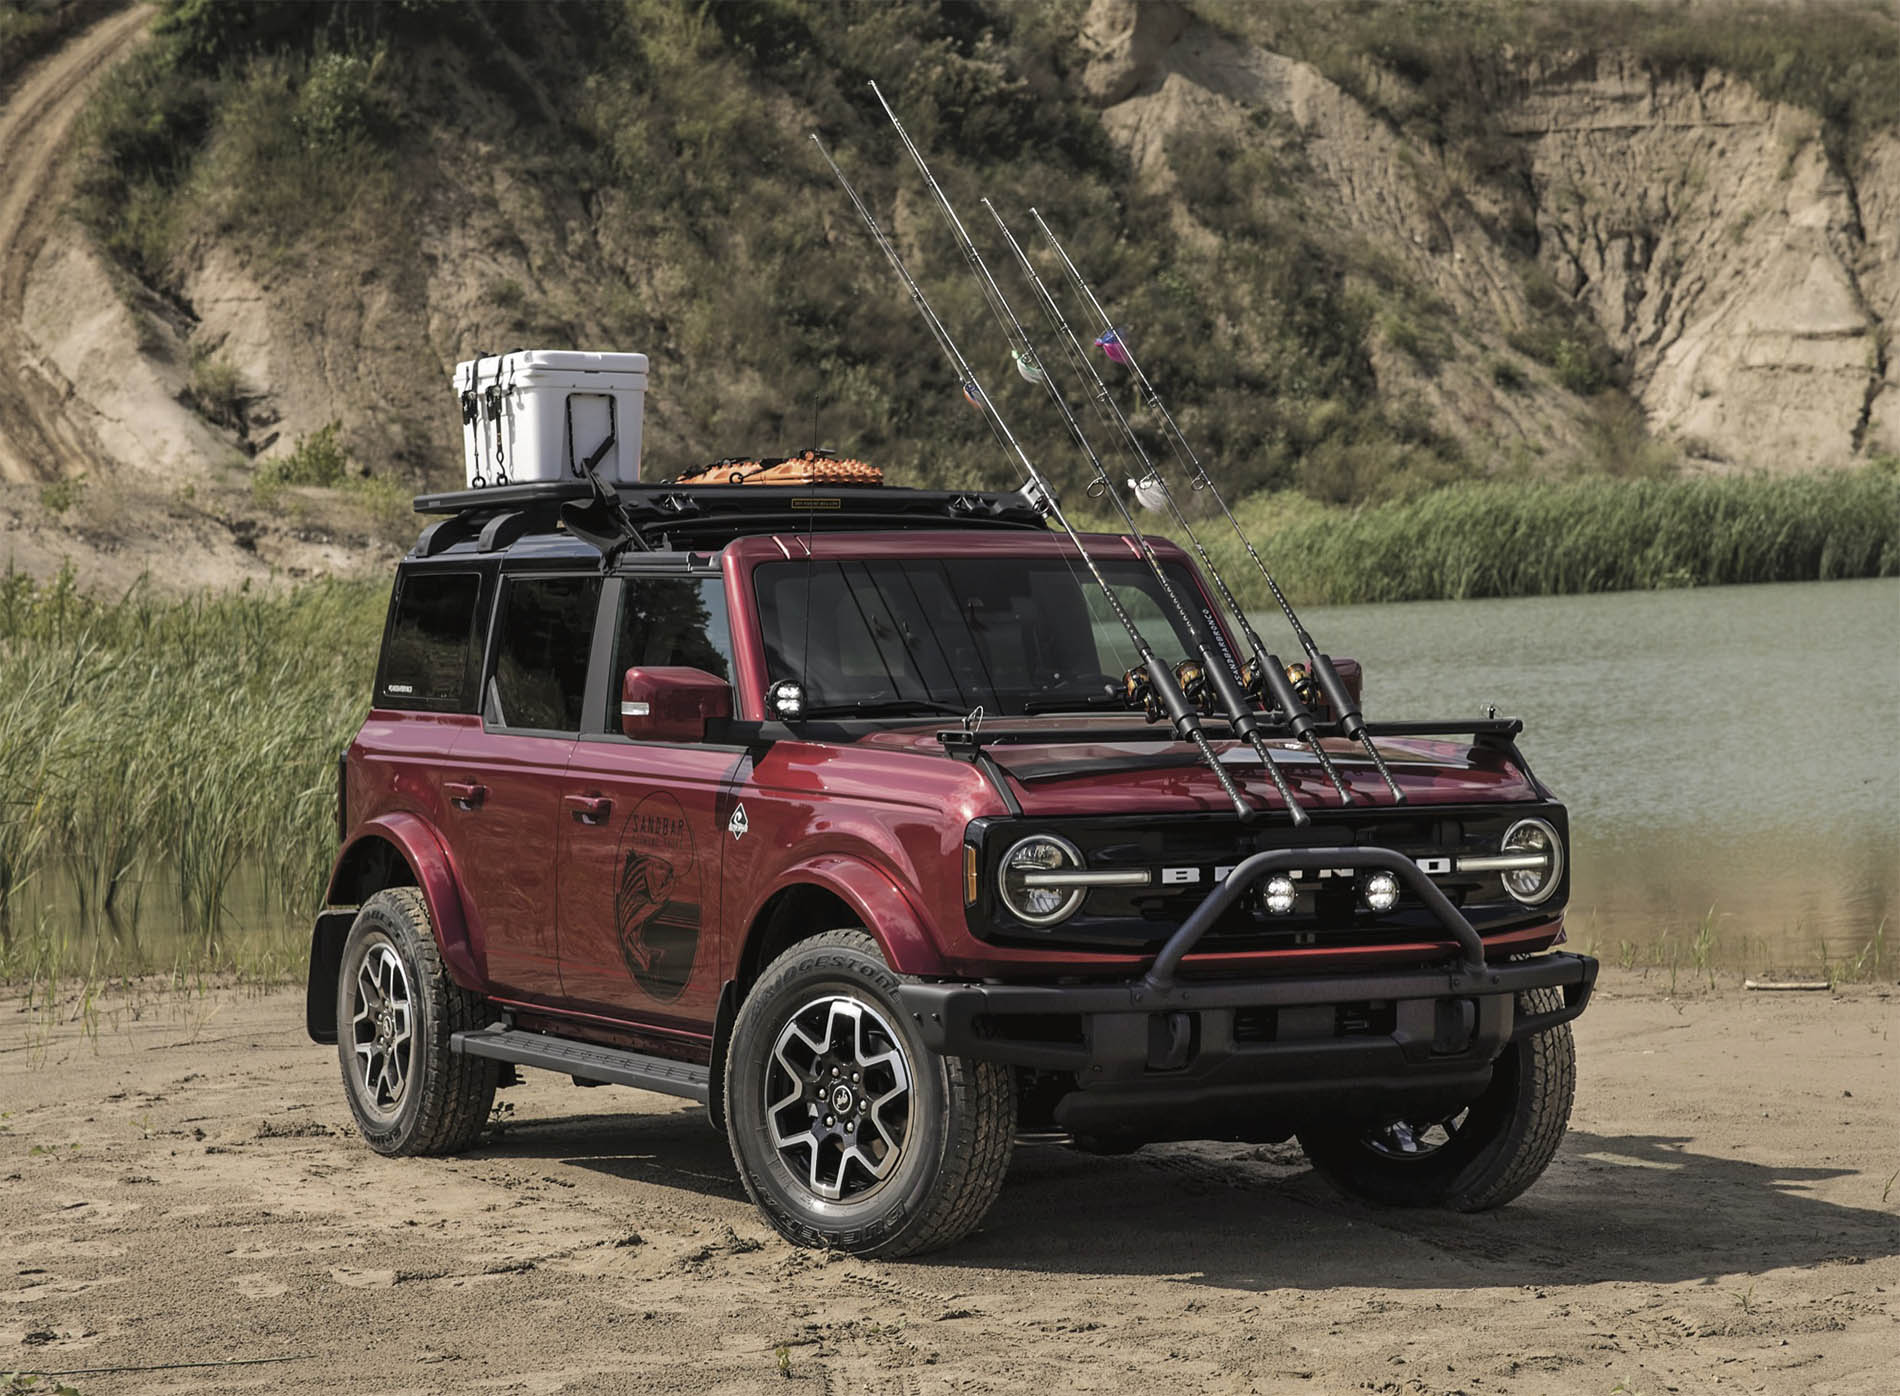 2021 Bronco Four Door Outer Banks Fishing Guide Concept.jpg